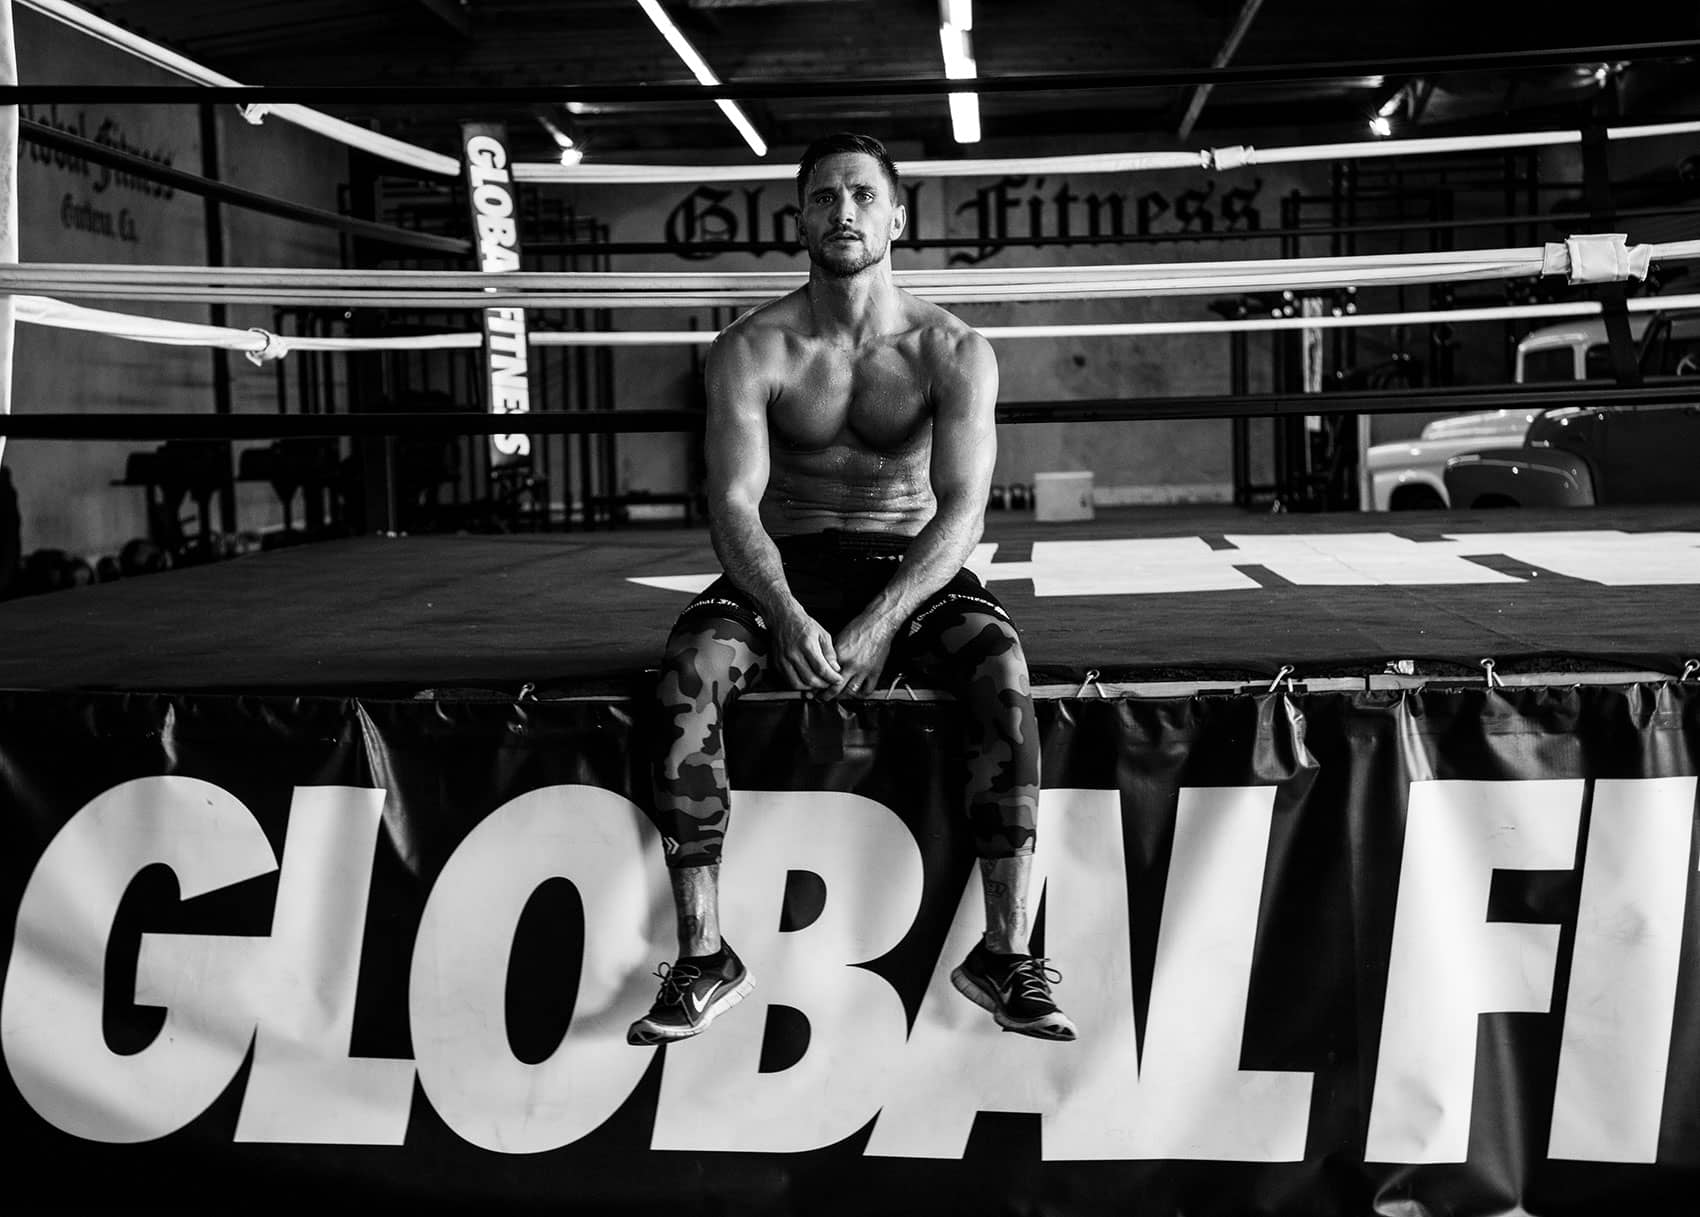 Global_fitness_fighter_1444